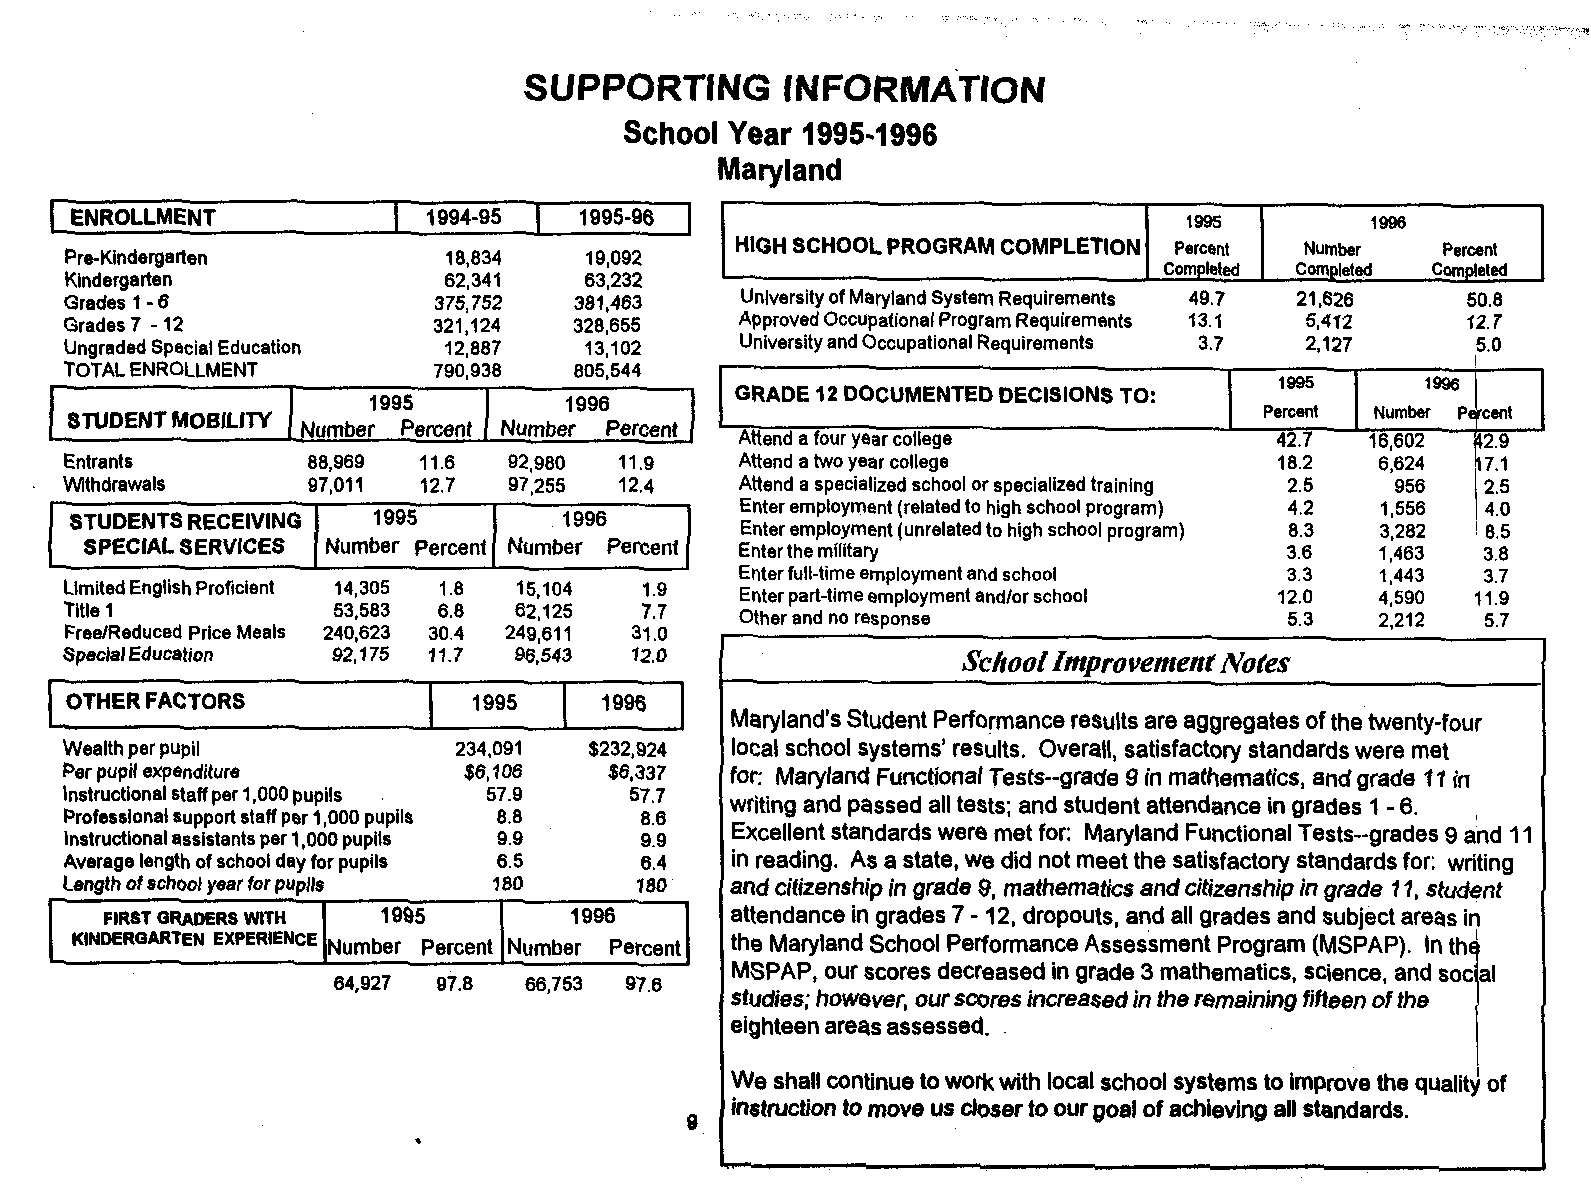 Sample of Maryland Supporting Information Data